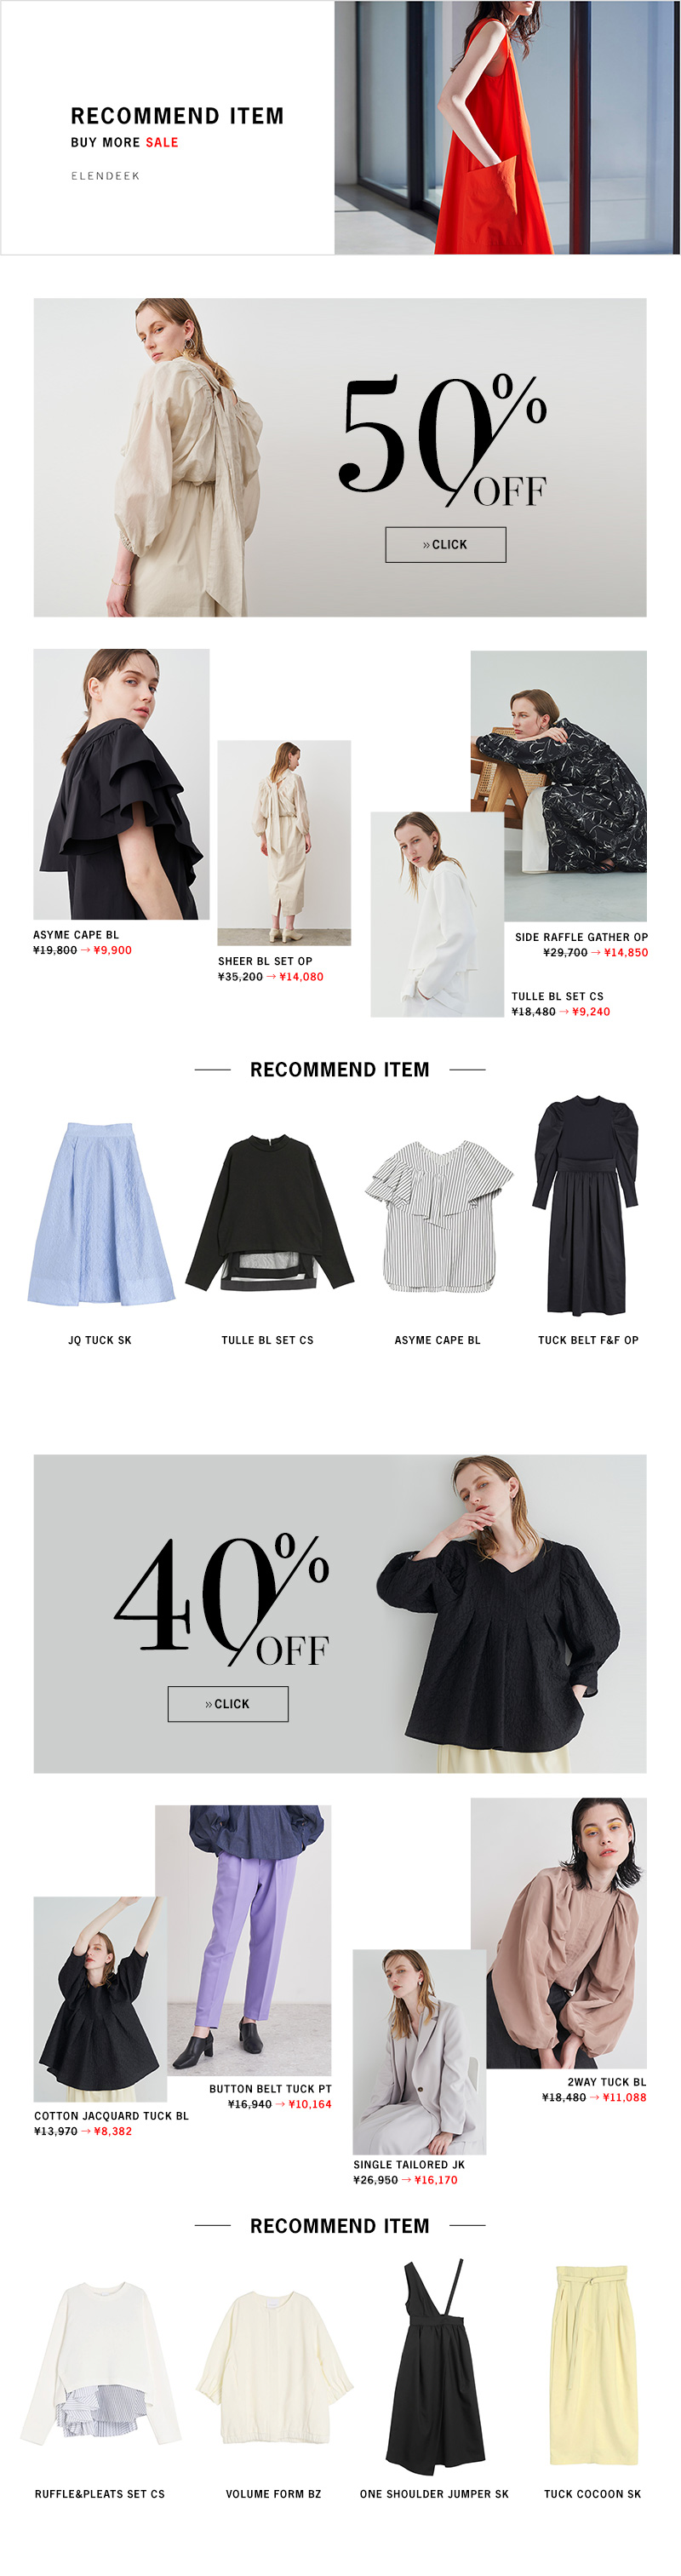 RECOMMEND ITEM BUY MORE ON SALE